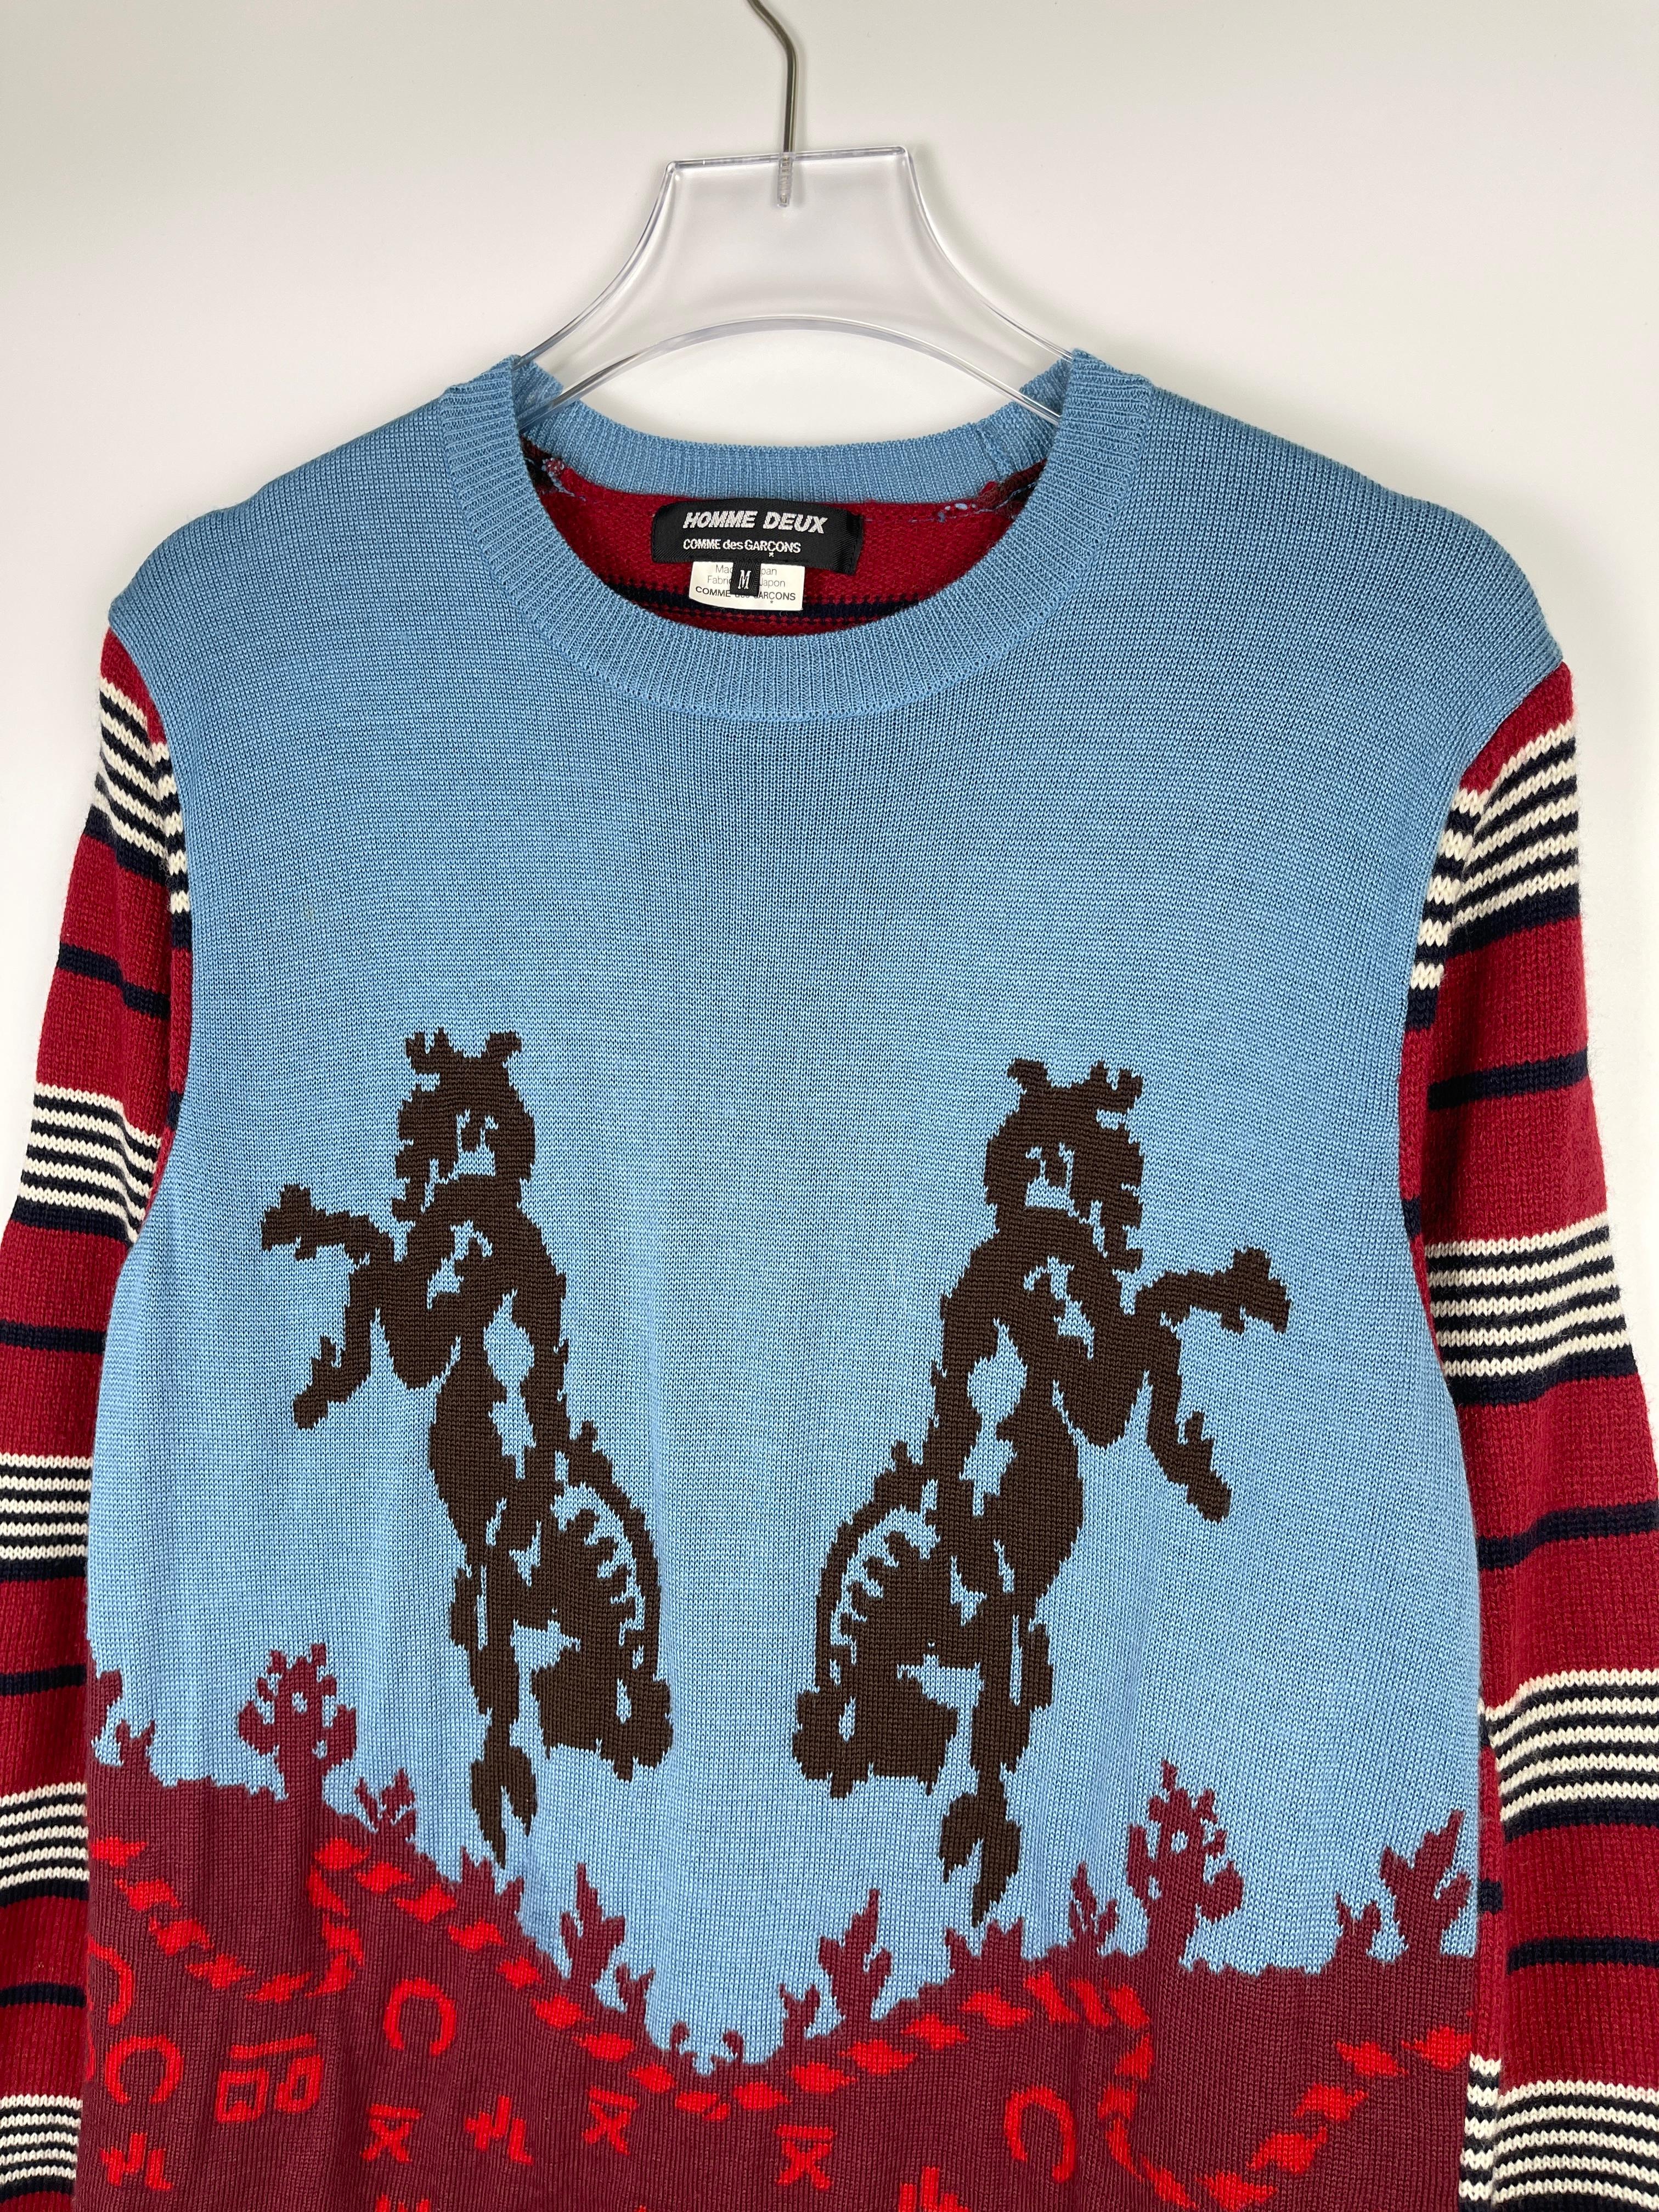 Comme des Garcons Homme Deux A/W2012 Abstract Cavalier Sweater  For Sale 4